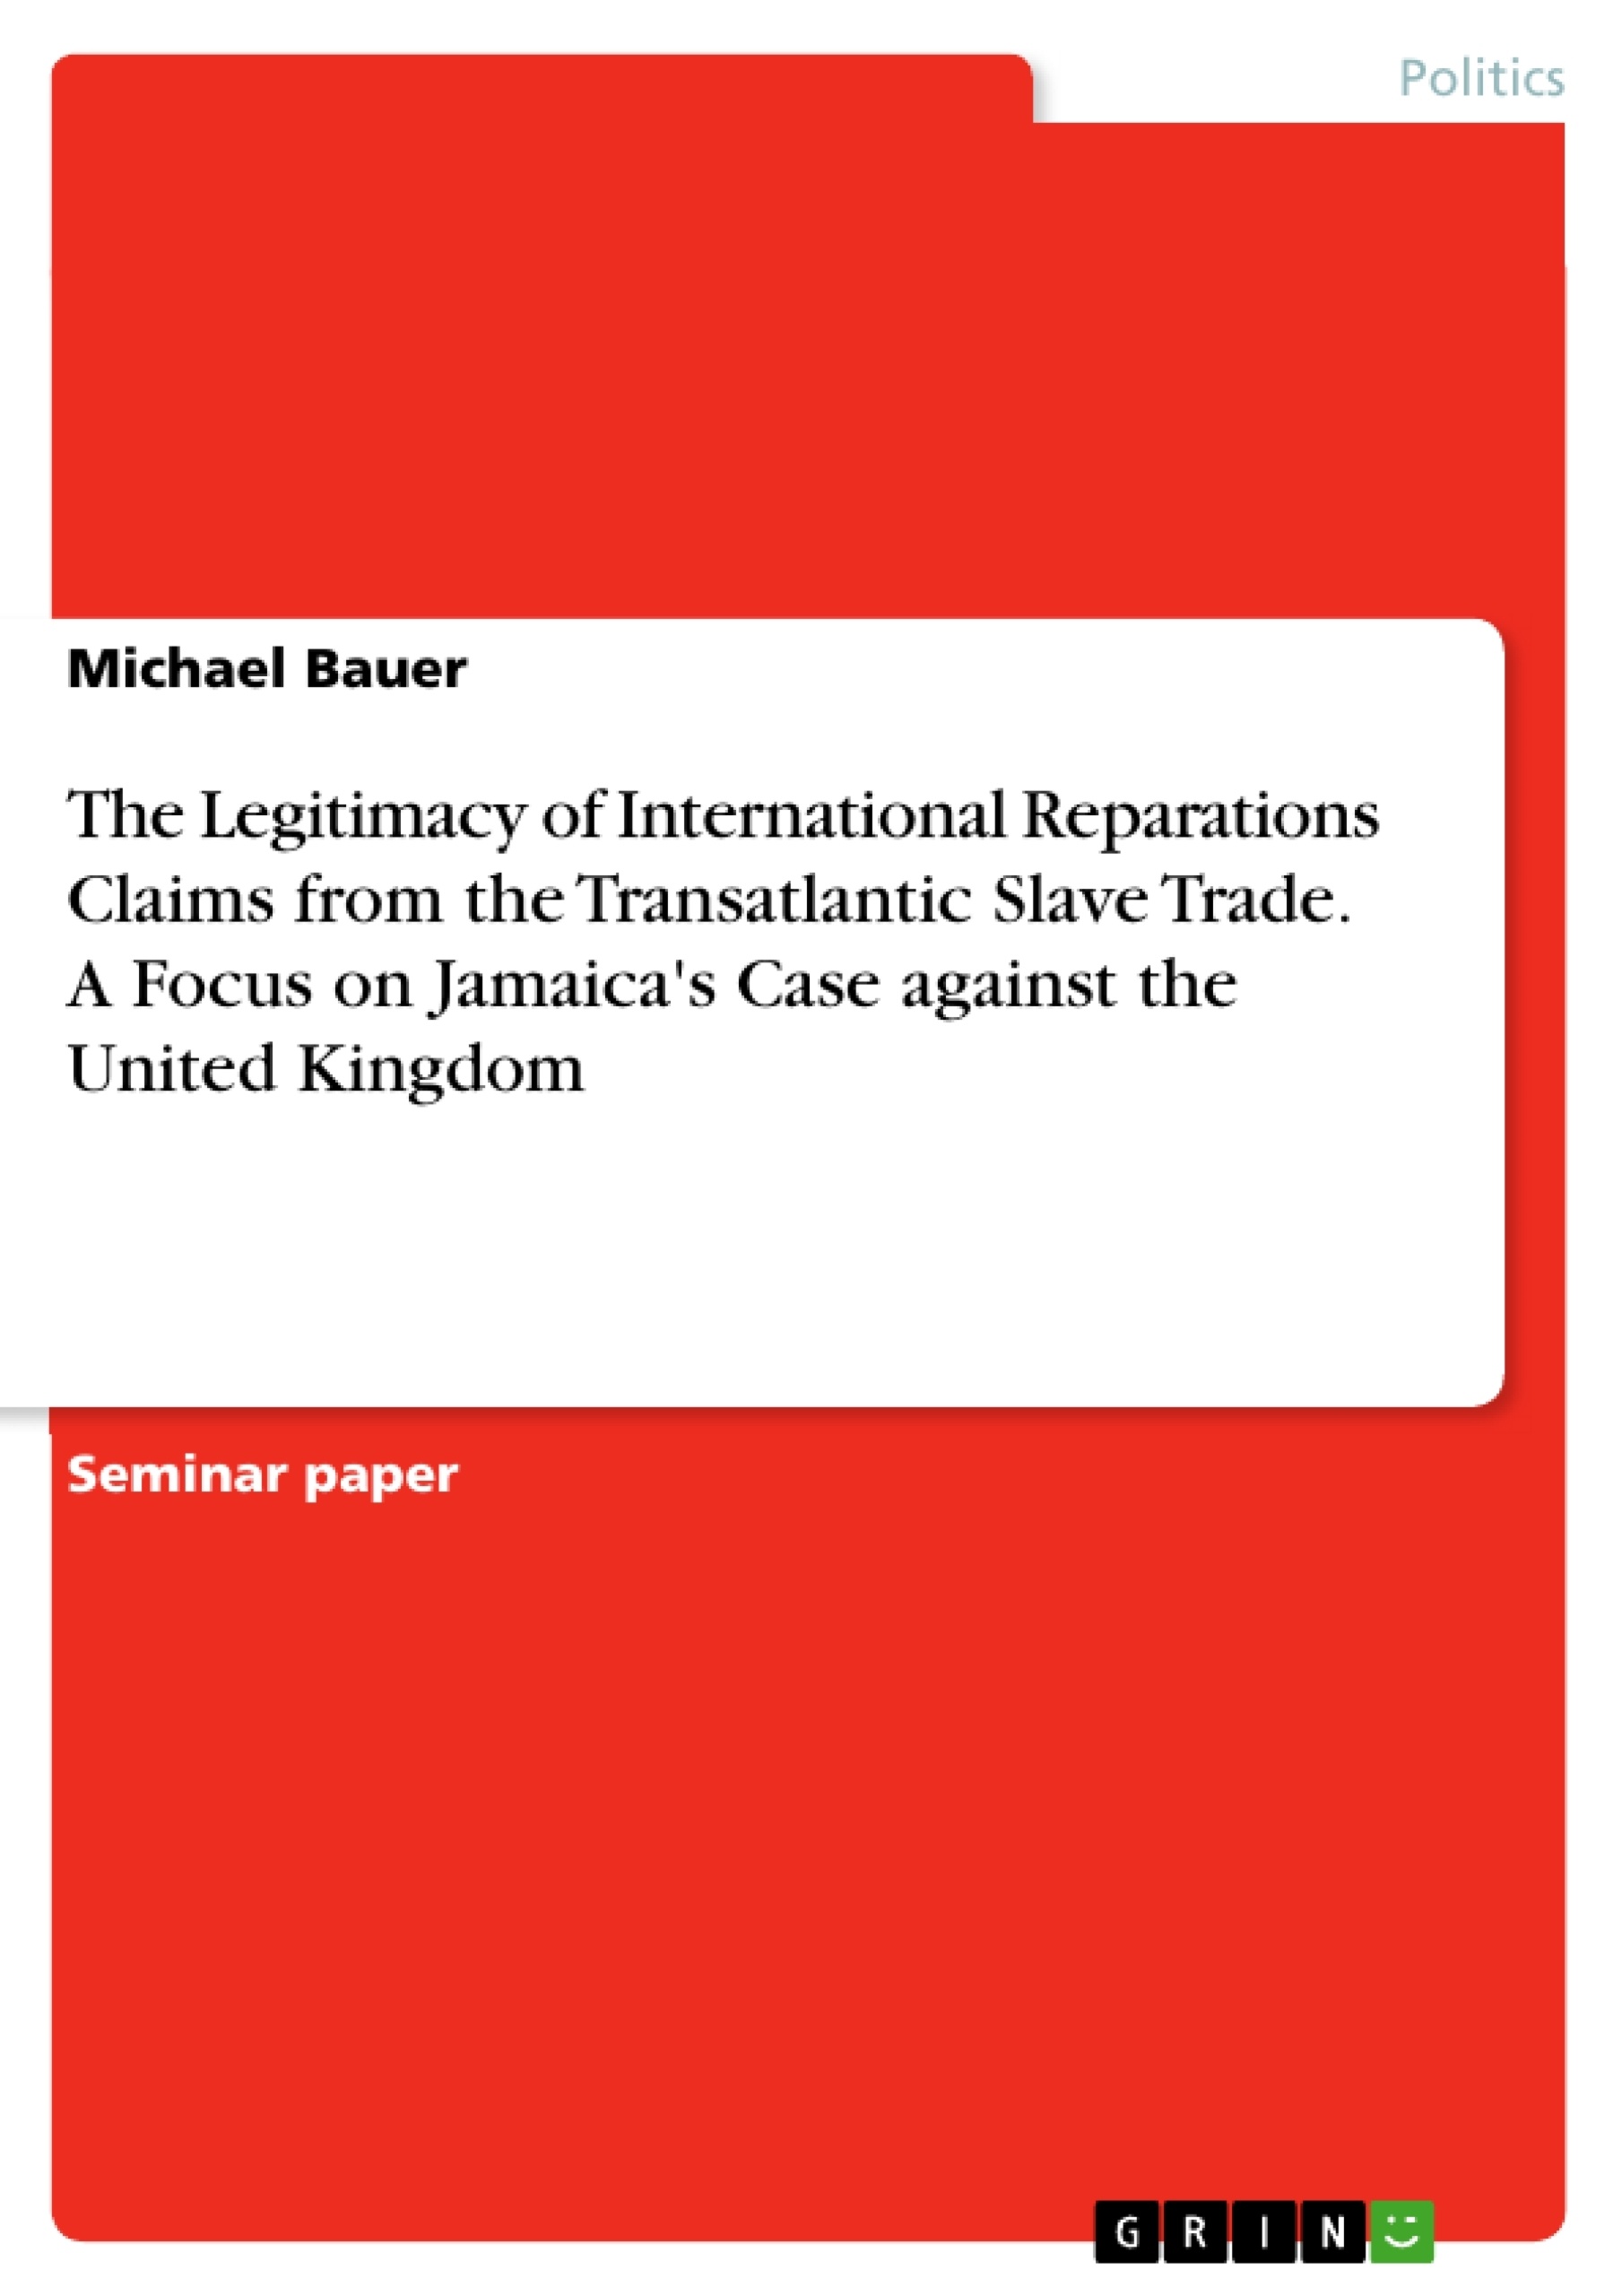 Titel: The Legitimacy of International Reparations Claims from the Transatlantic Slave Trade. A Focus on Jamaica's Case against the United Kingdom